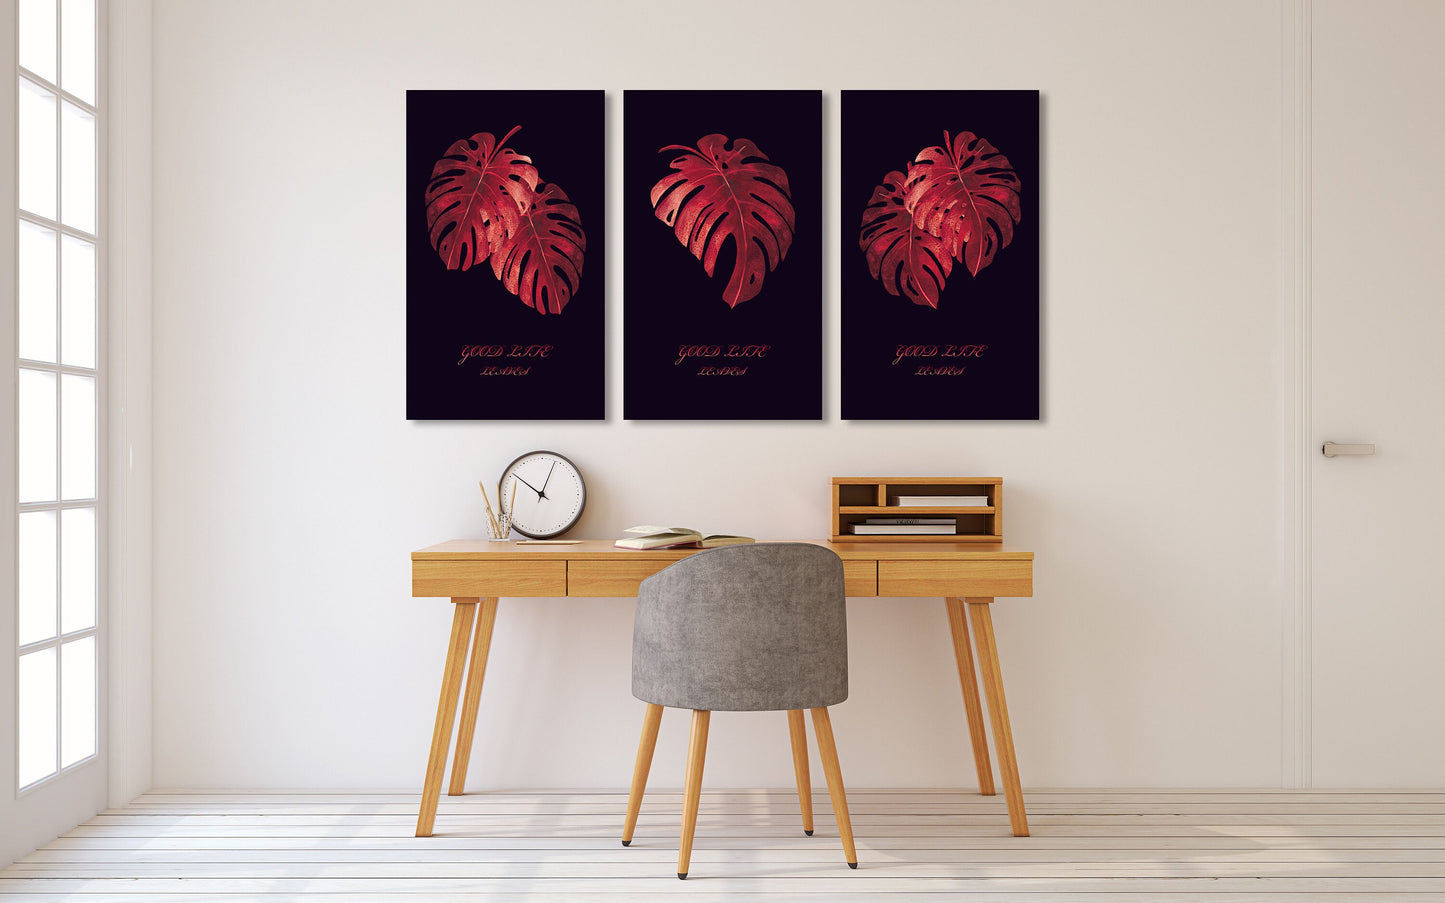 Monstera canvas , tropical wall decor, canvas painting , plant wall art, colorful red wall art, decorative gift, printable wall art set of 3